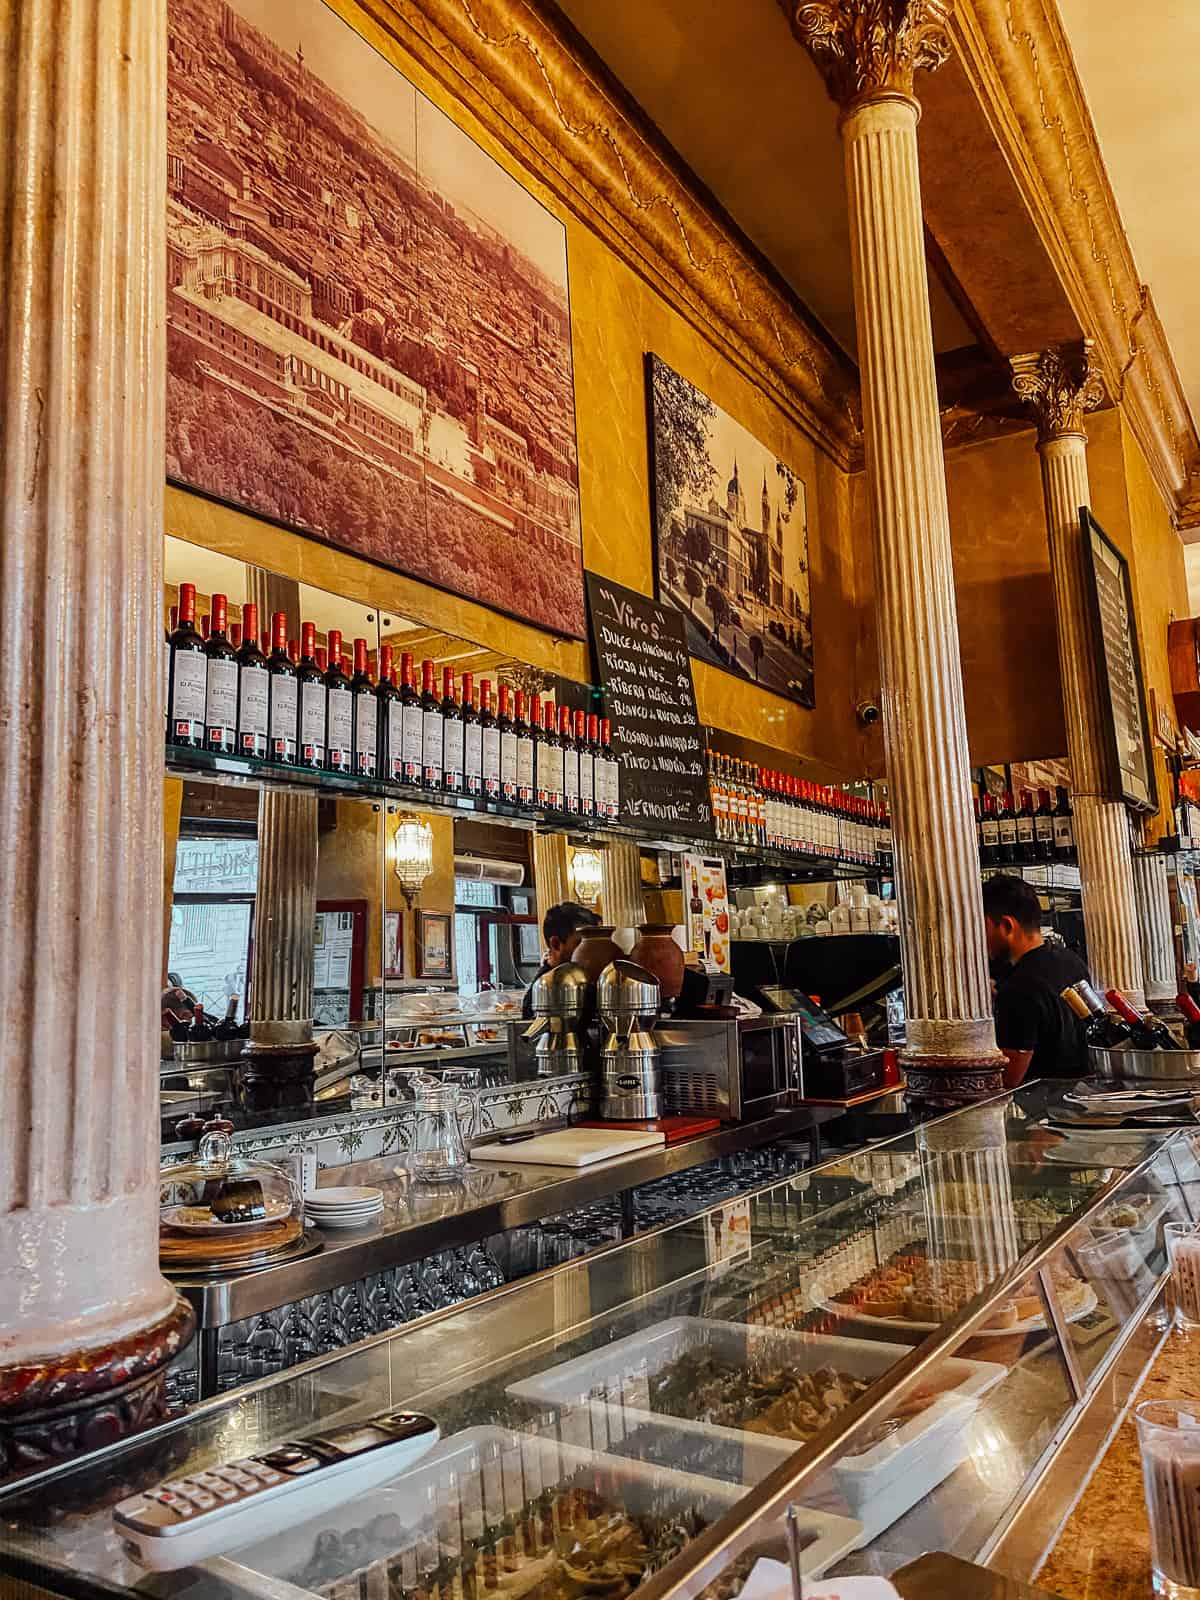 Interior of a traditional Madrid café with tall Corinthian columns and a long bar displaying rows of wine bottles. The walls are adorned with sepia-toned photographs of historical landmarks, and baristas are attending to customers in the background